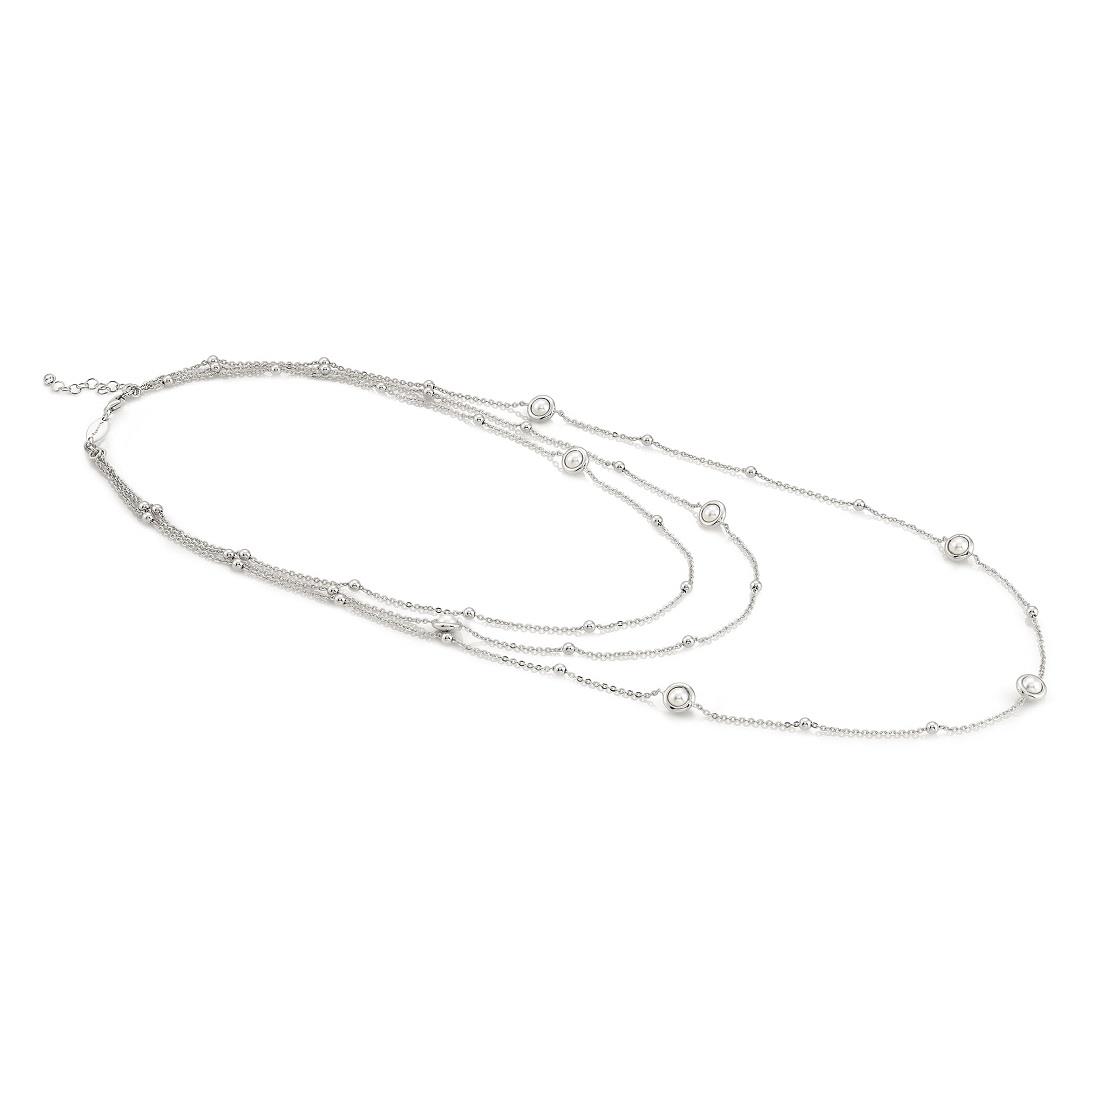 Long necklace in silver and pearls - NOMINATION